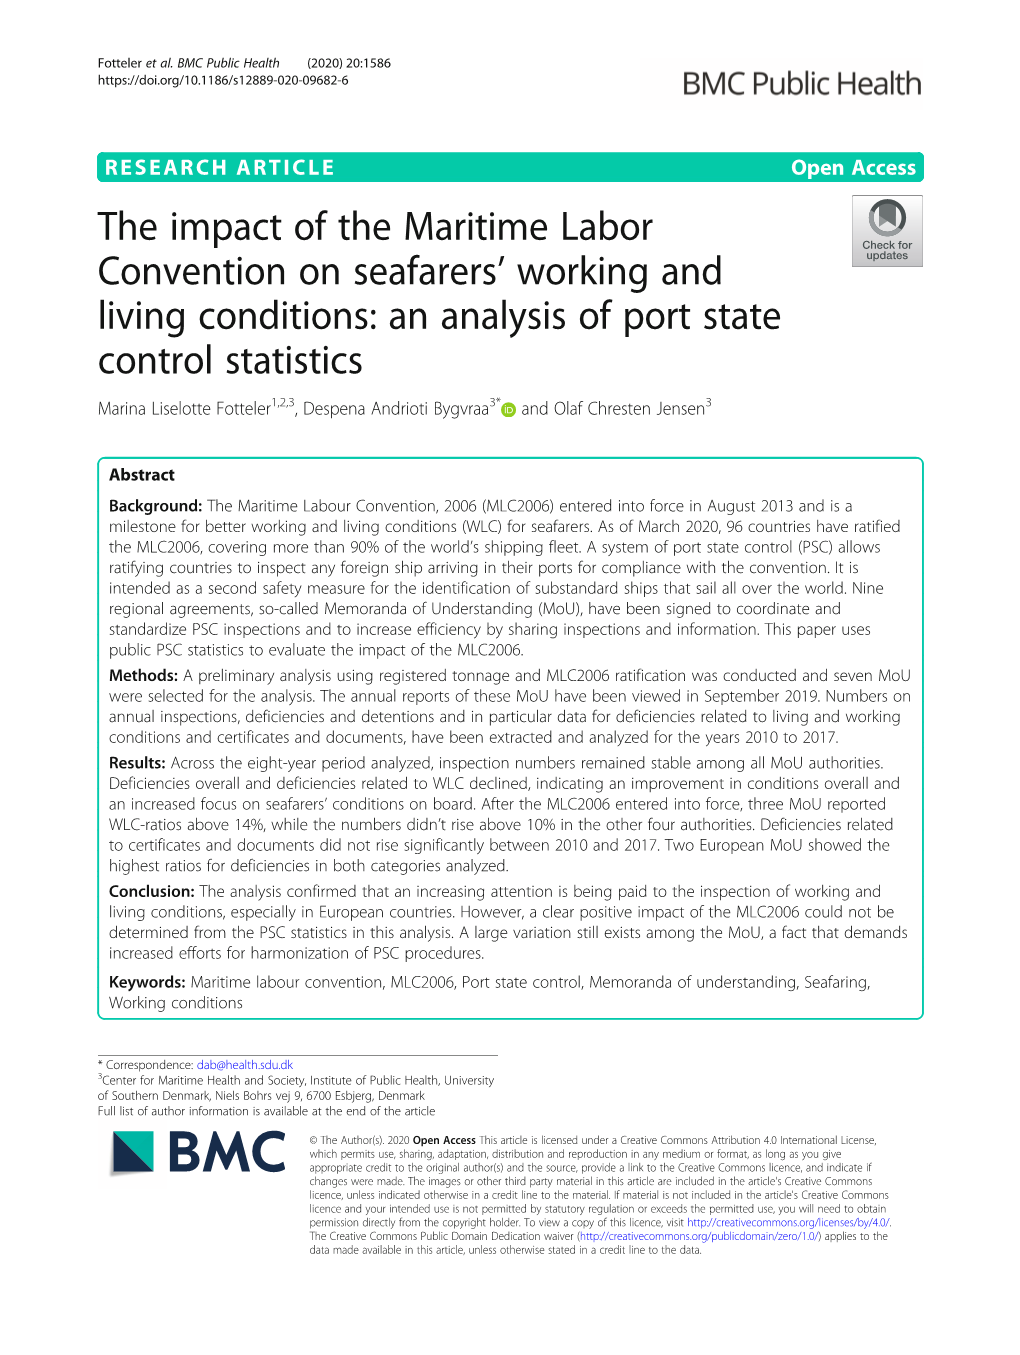 The Impact of the Maritime Labor Convention on Seafarers' Working